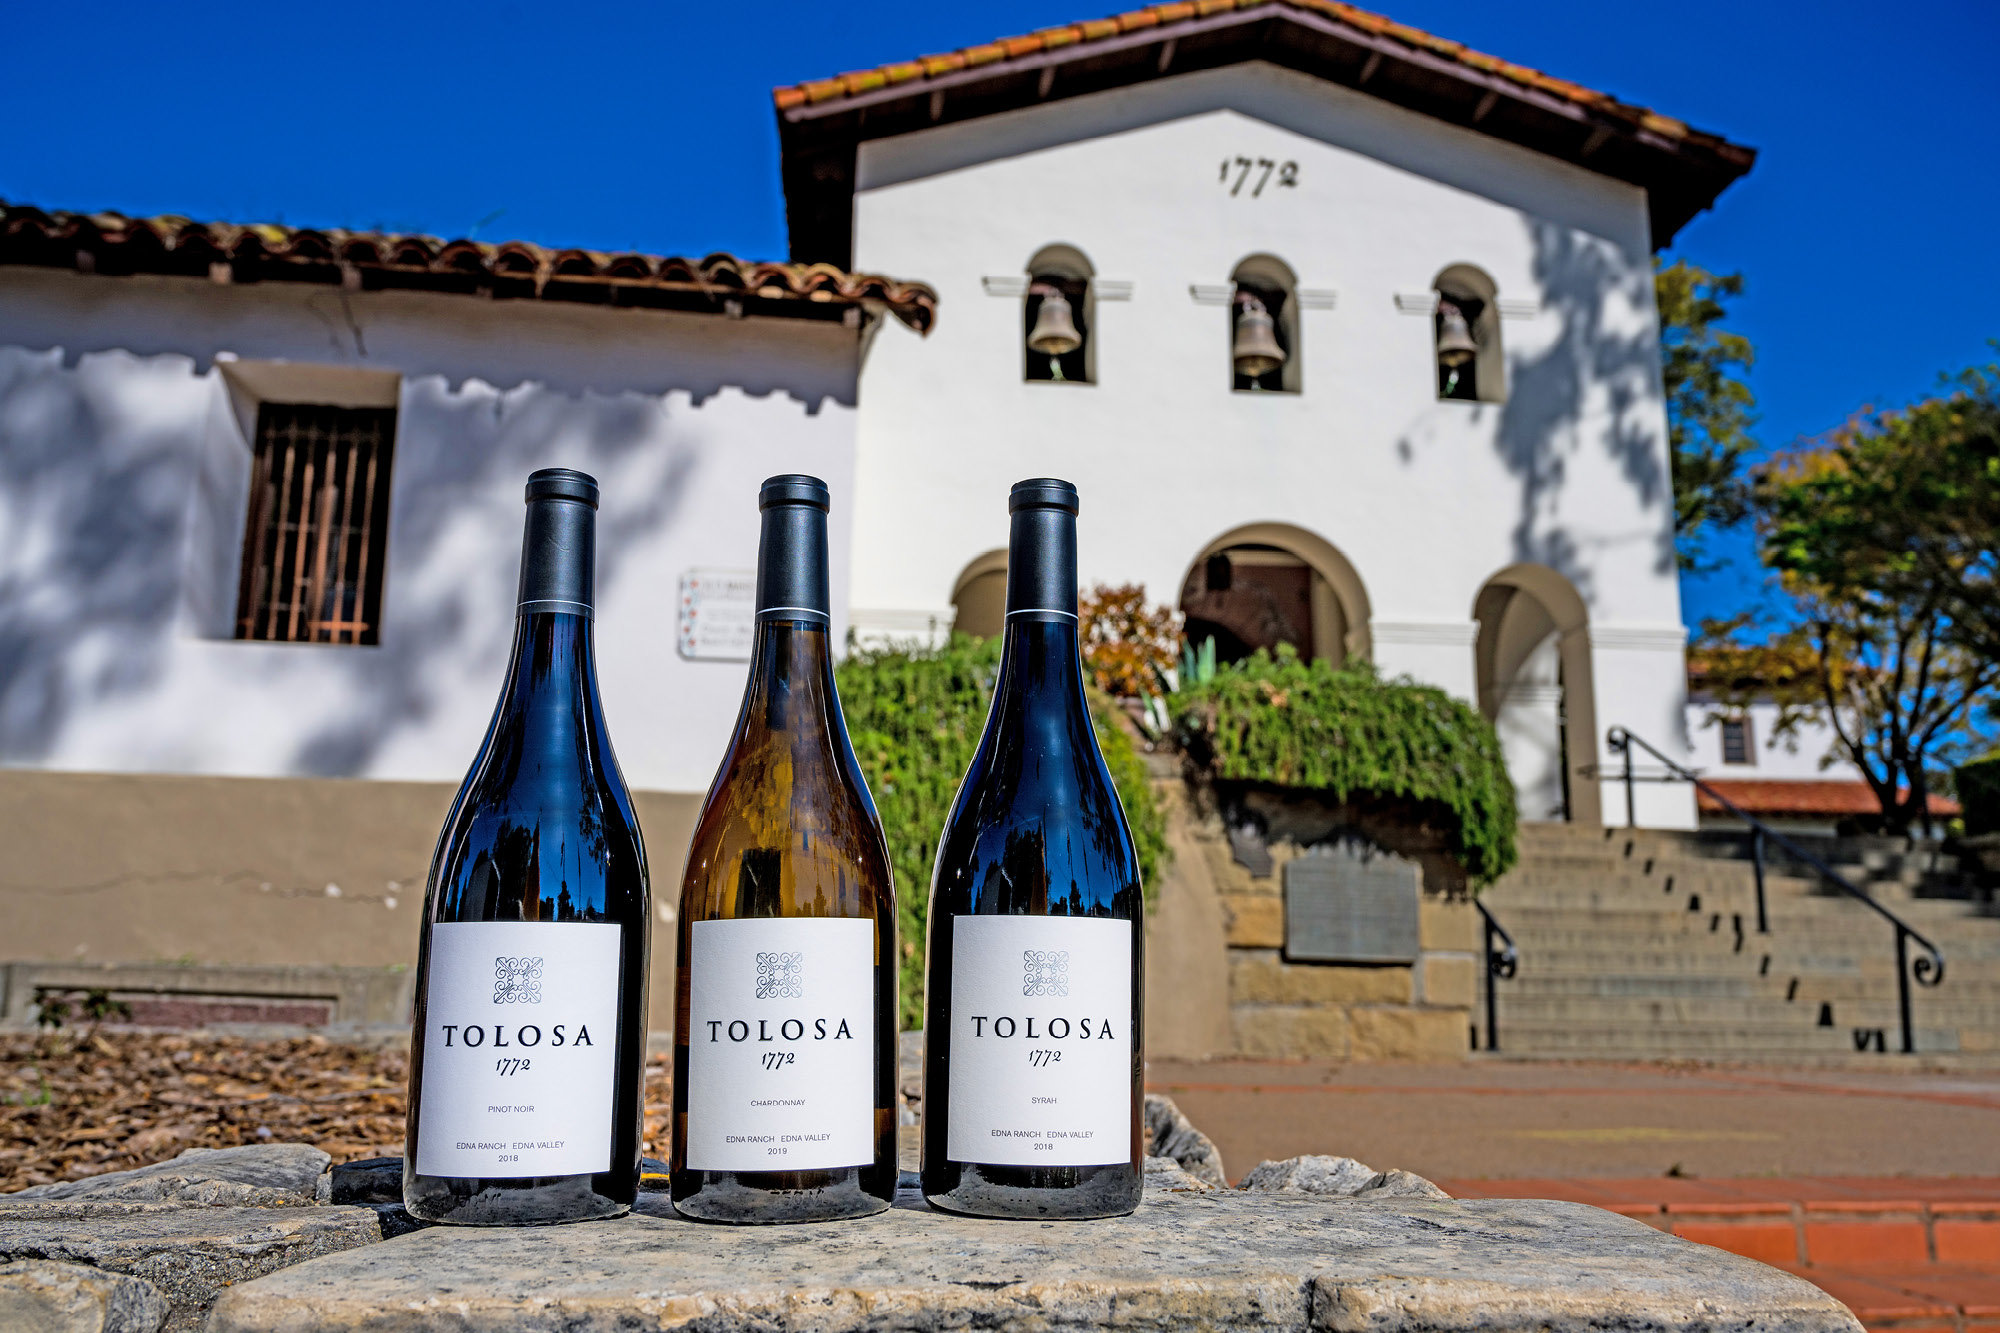 A bottle of 1772 Pinot Noir, Chardonnay, and Syrah sitting in front of the San Luis Obispo de Tolosa mission